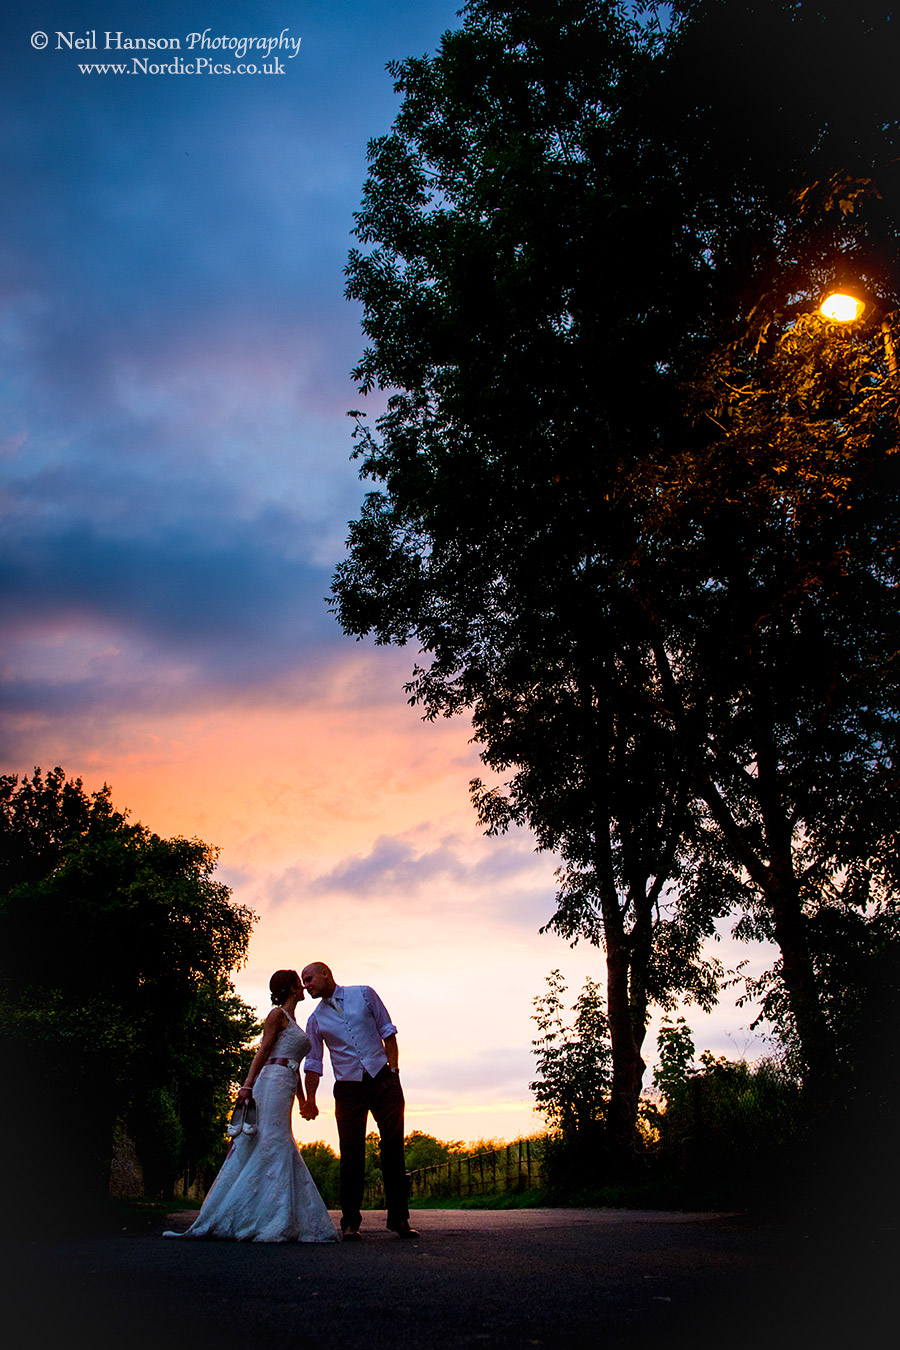 Wedding Day Sunset at Cogges Farm Museum